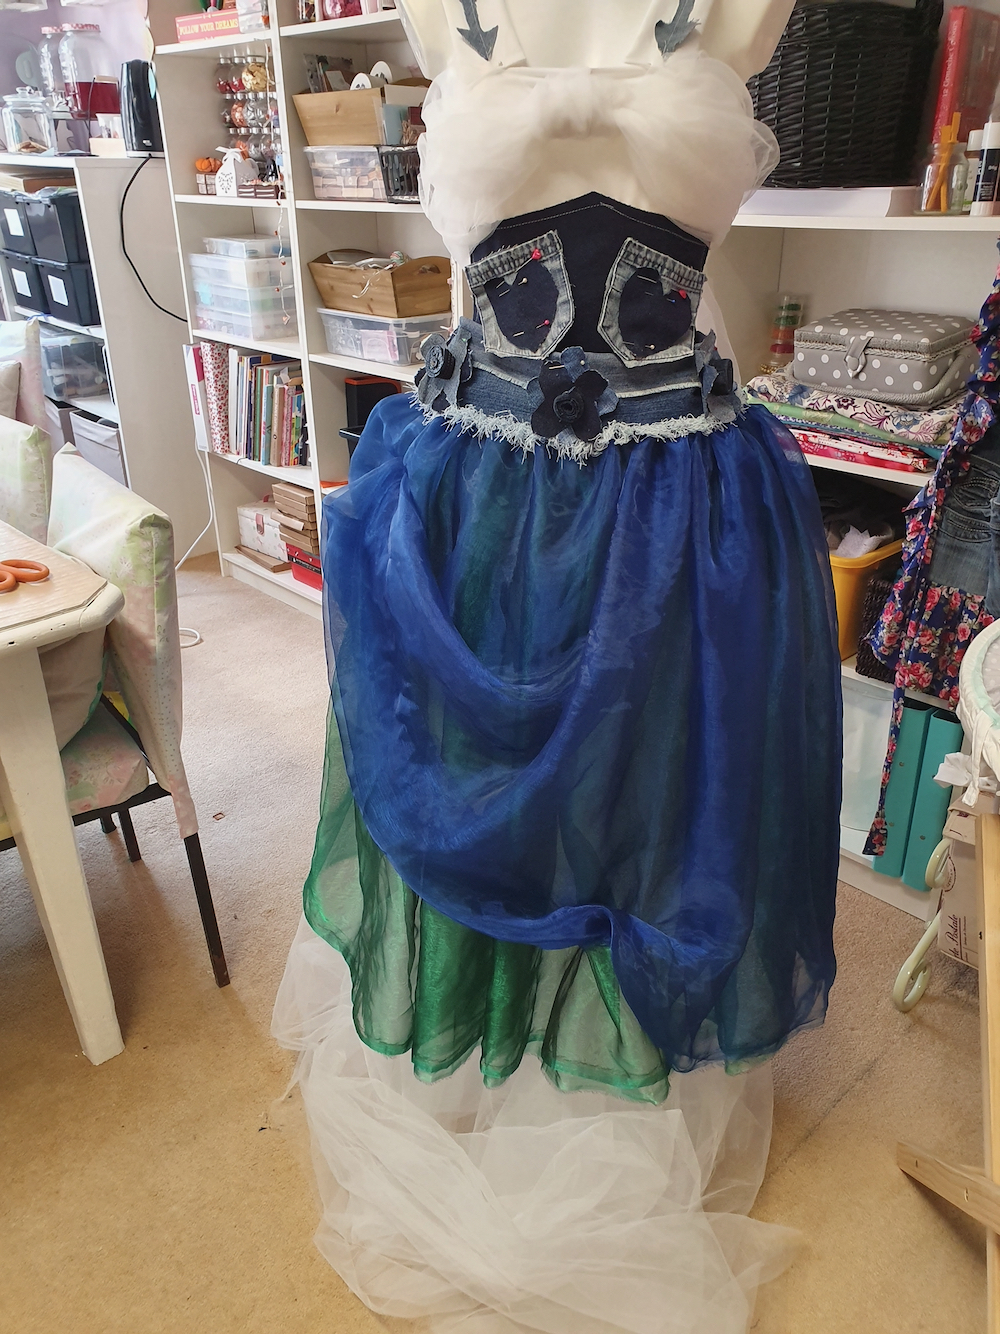 Psyche's dress in mid-construction with blue organza skirt and denim pockets sewn onto the bodice by Fitzy Peters with Natalie Bailey - Inspire